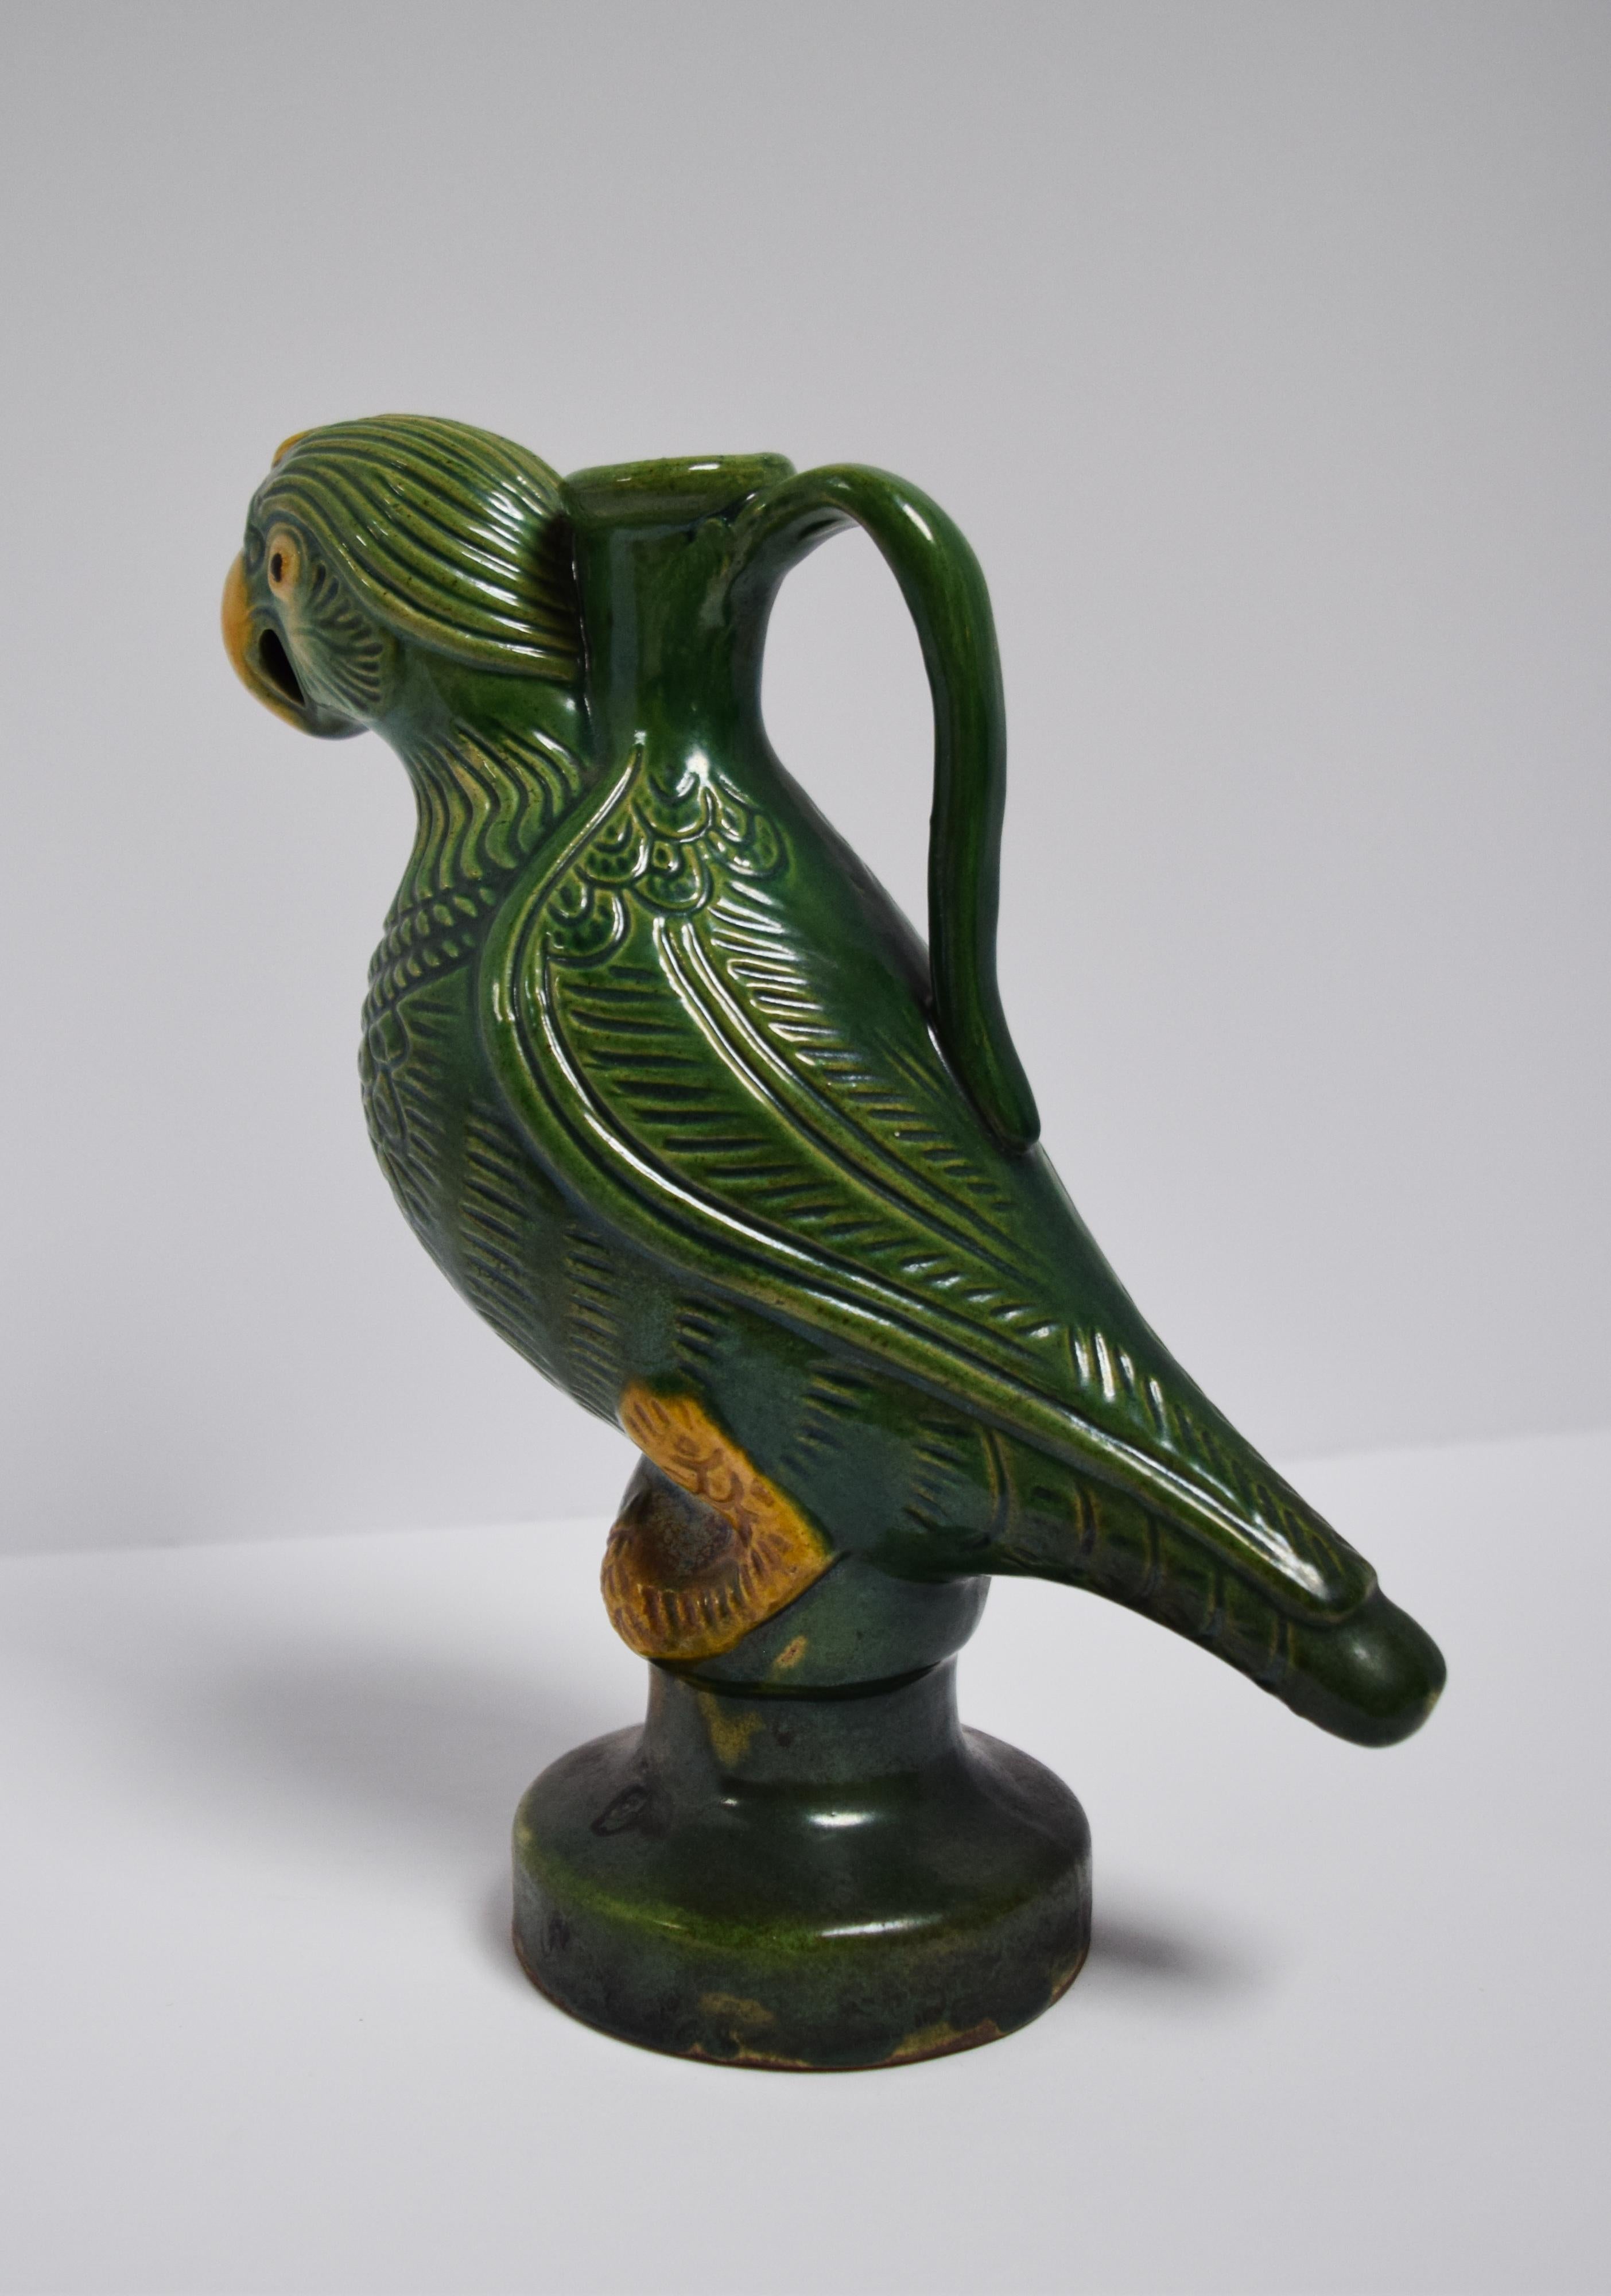 For centuries, the figure of the parrot has a rich history of symbolic meaning in China. In the later part of the 19th century, ceramic birds adorned public buildings and the homes of prominent figures. This beautiful hand-painted candle holder is